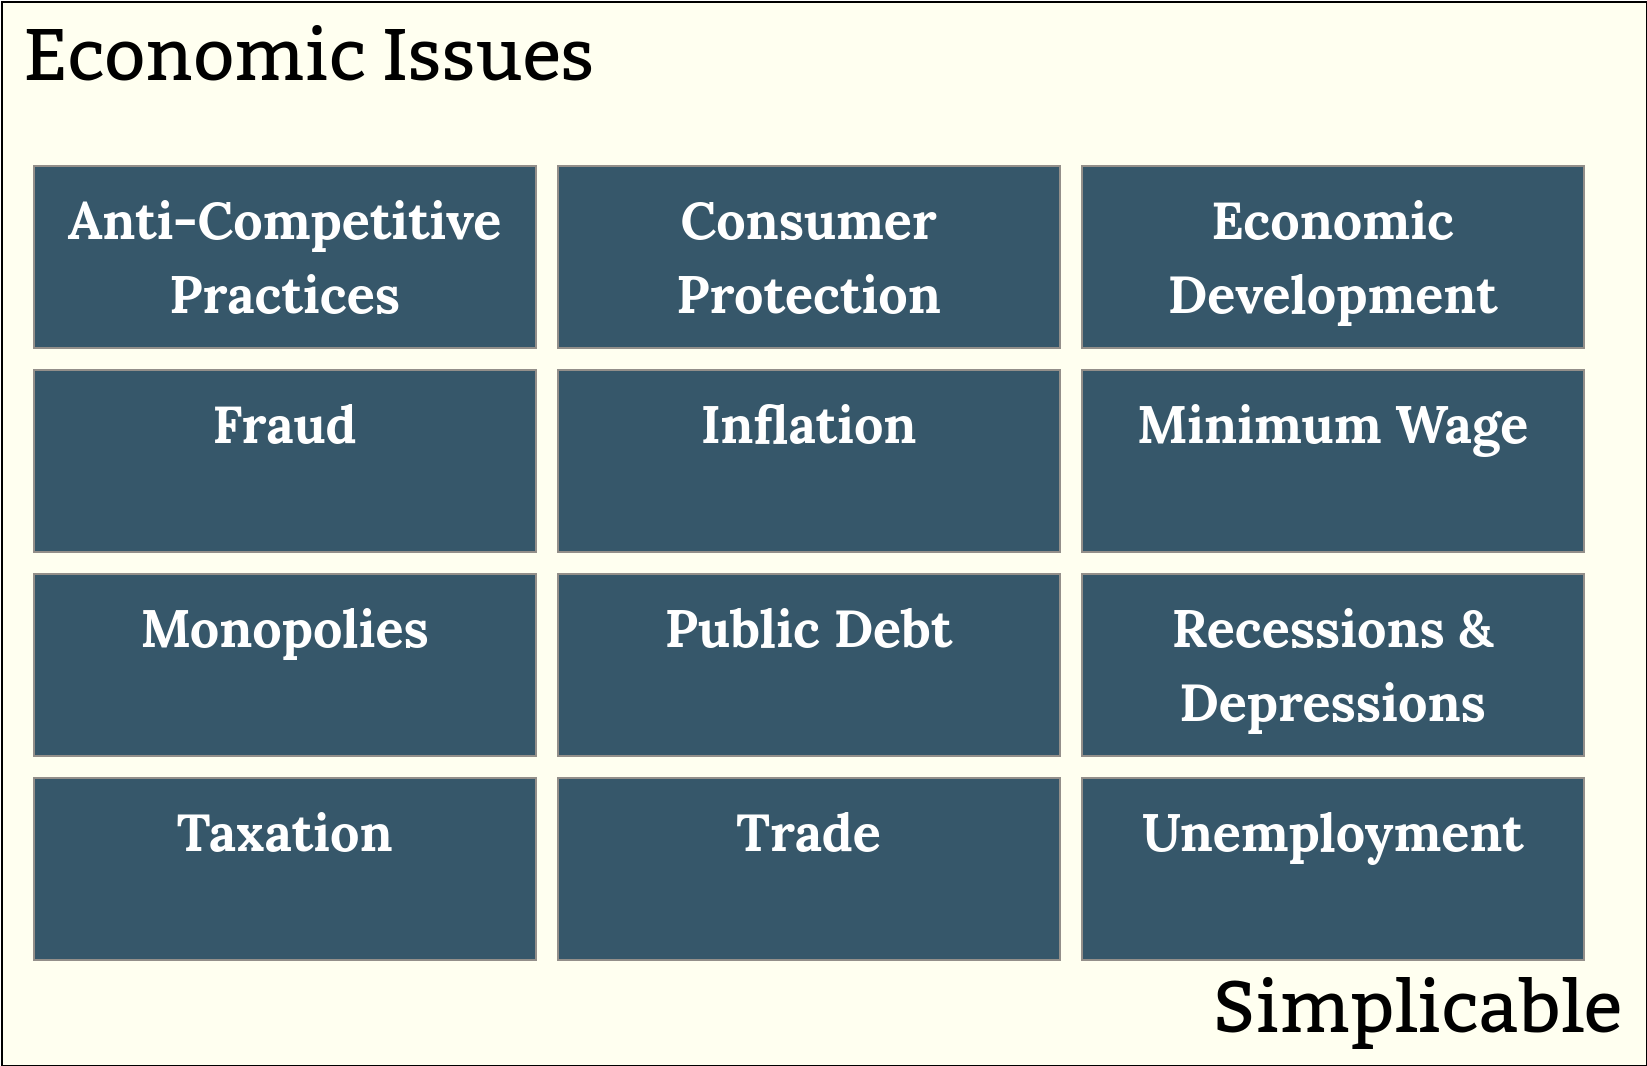 economic issues simplicable